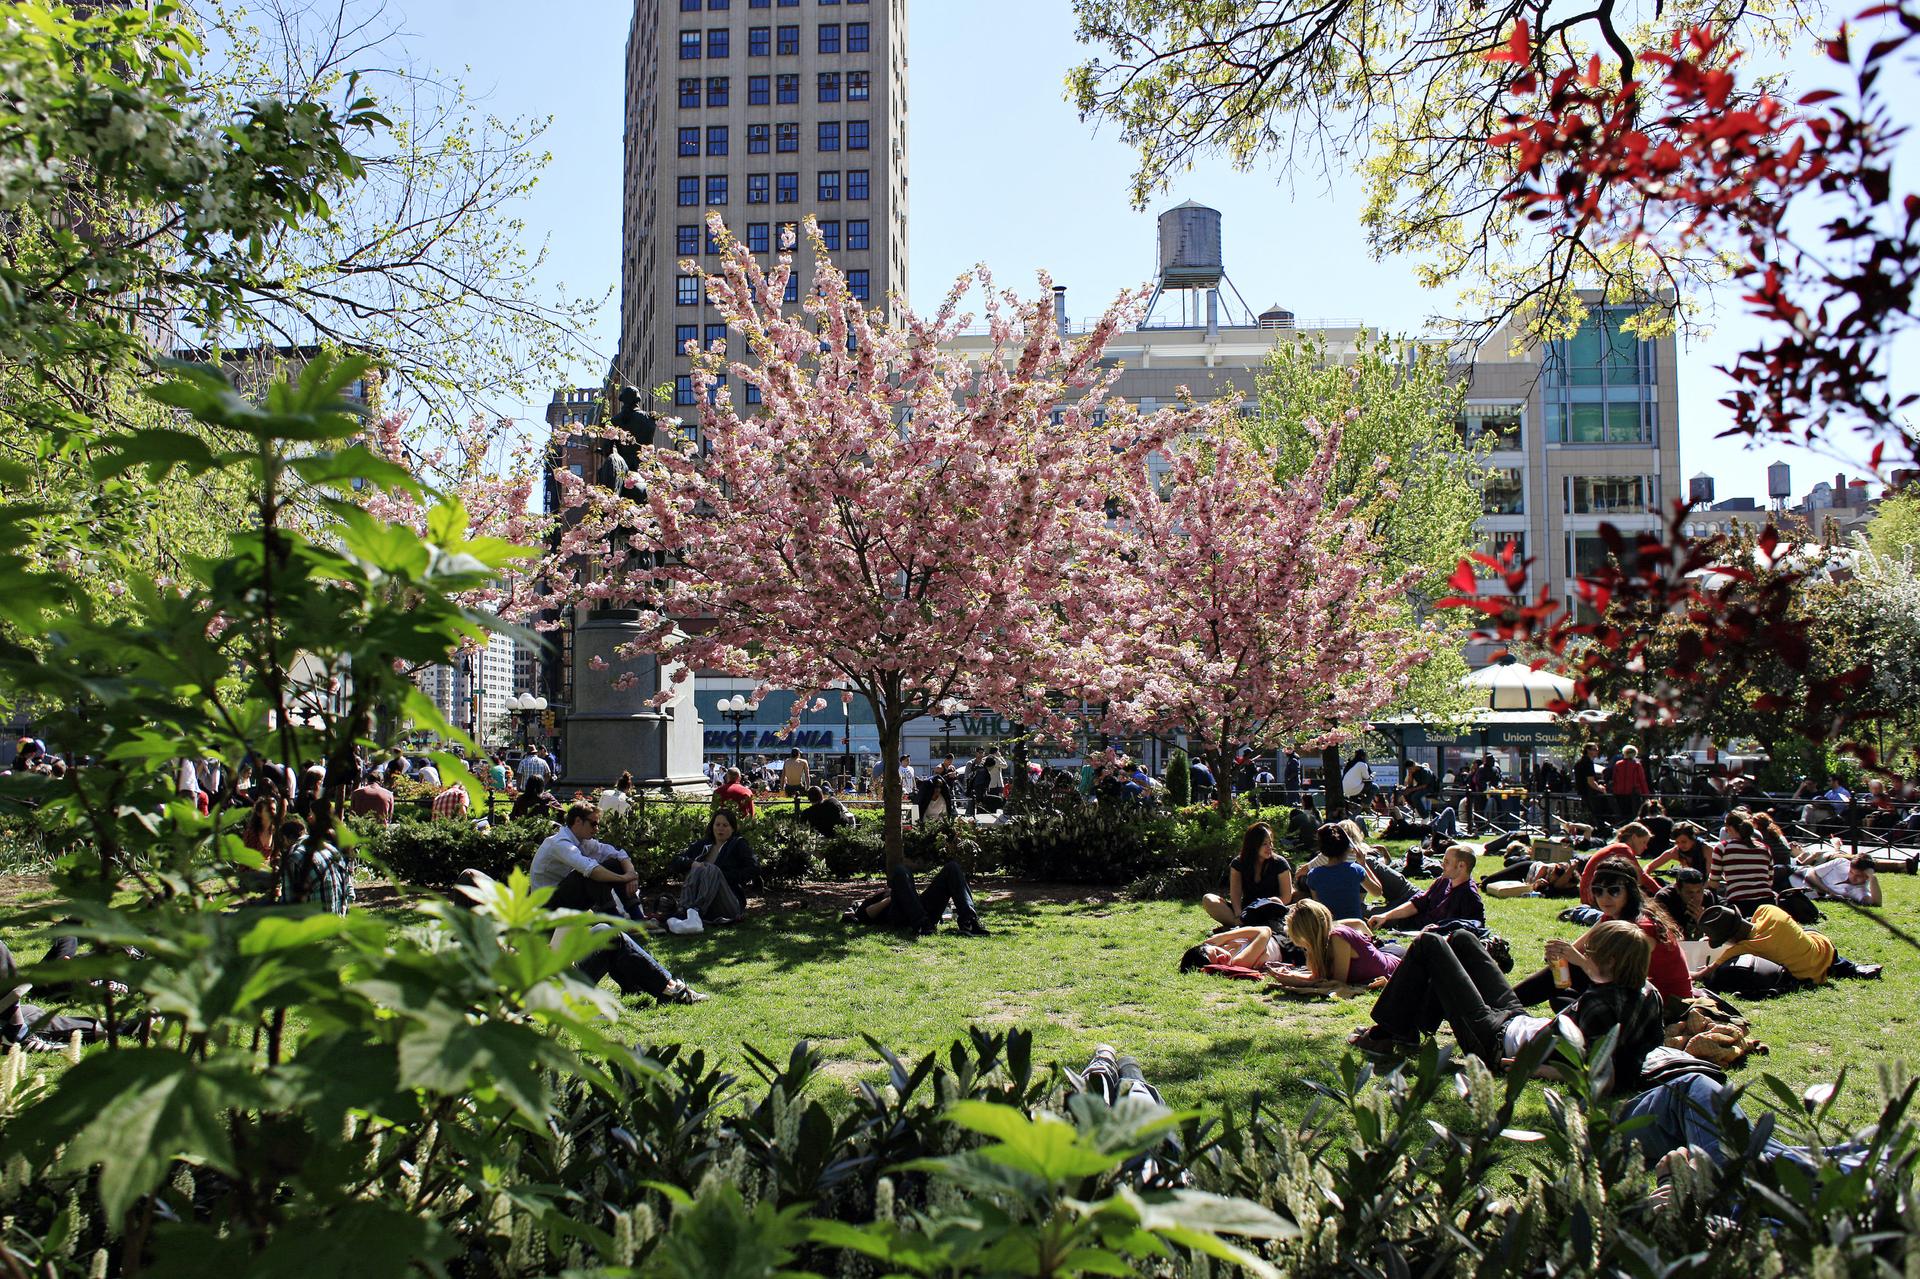 relaxing sunny afternoon in Union Square Park